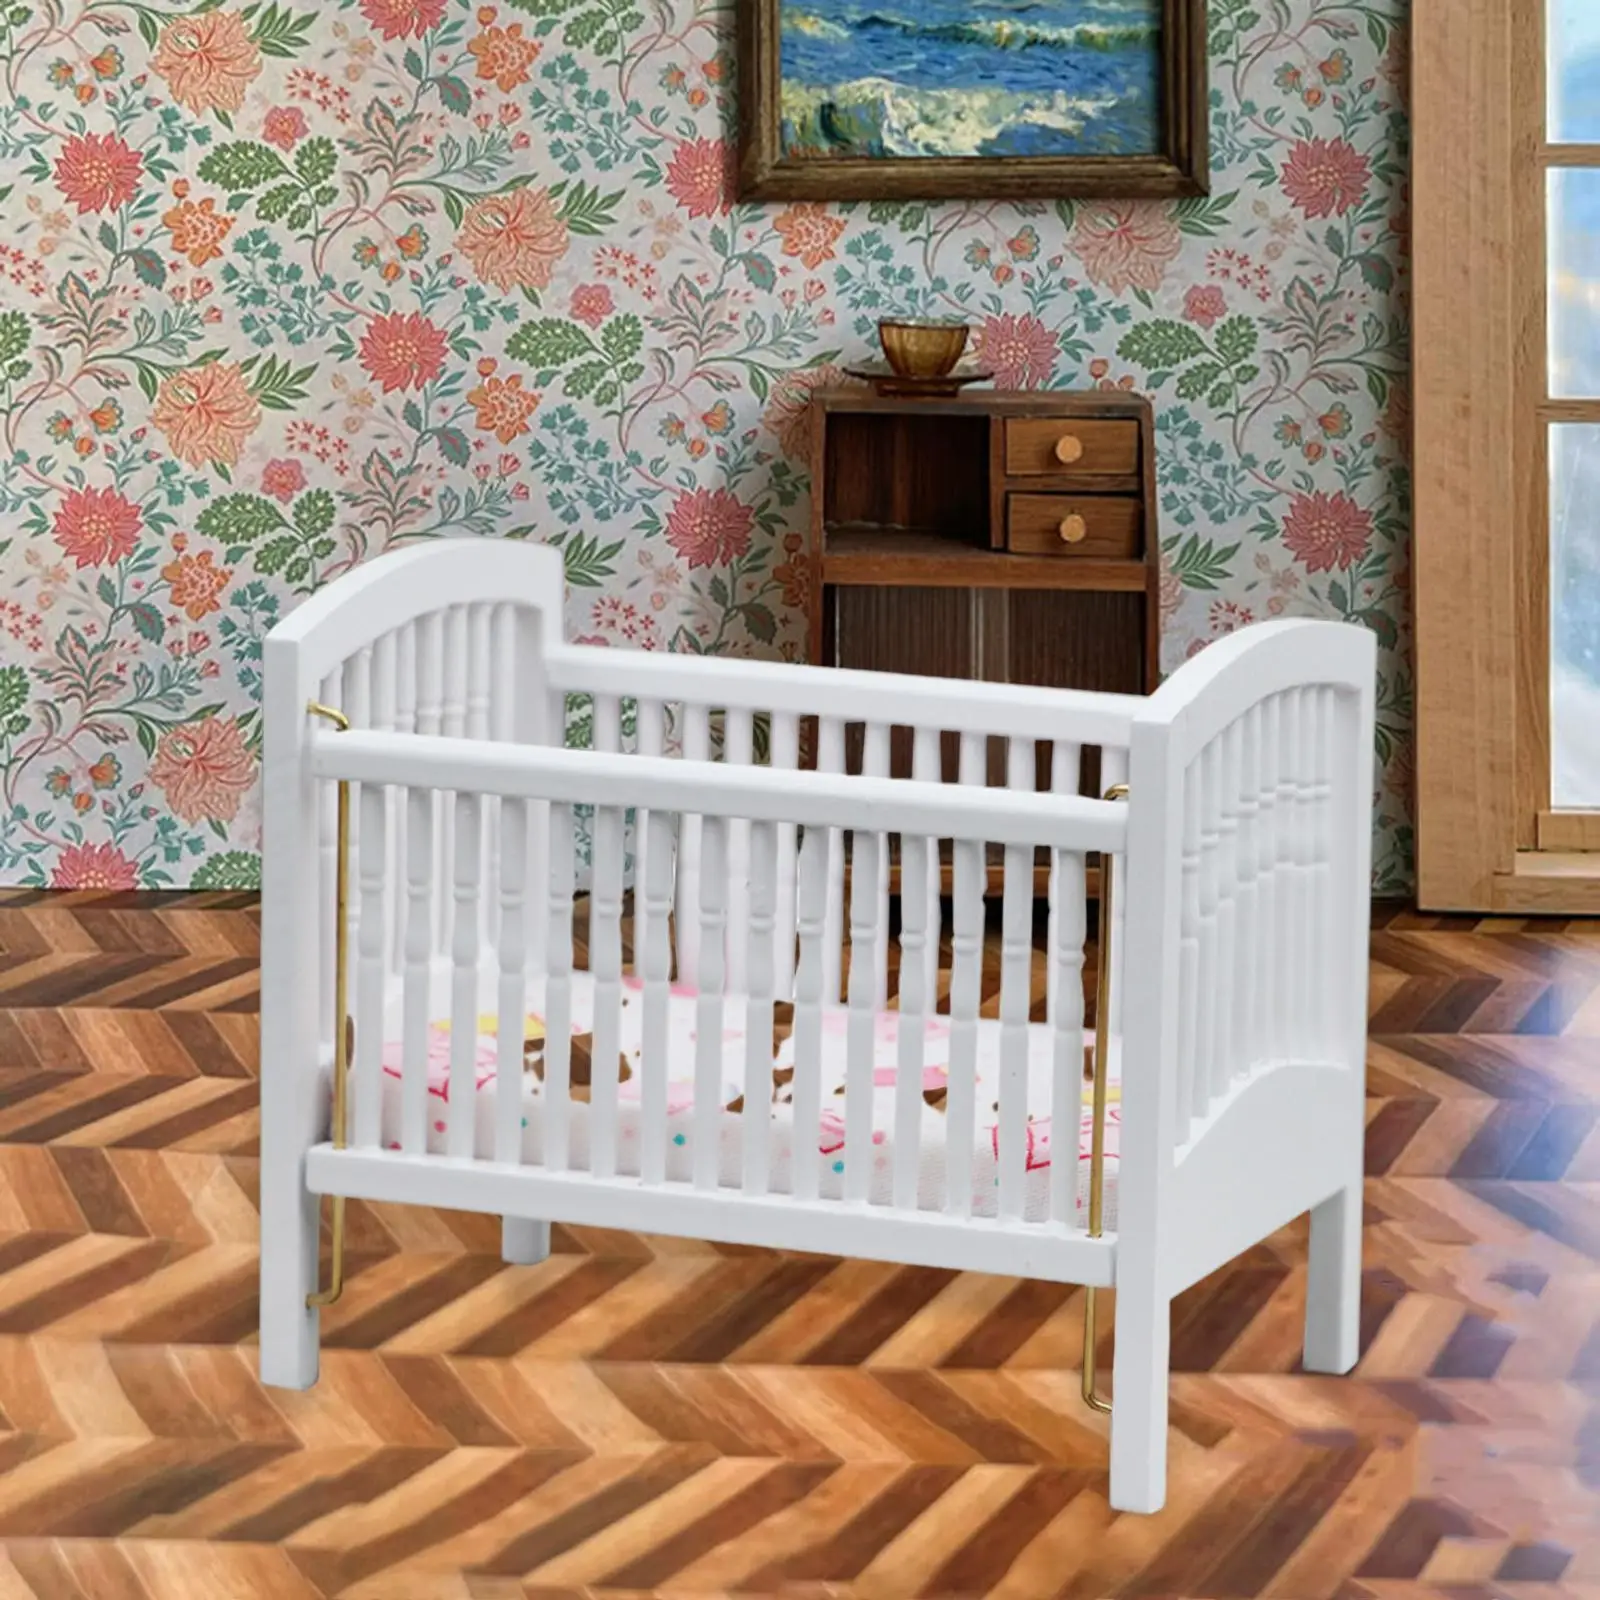 Wooden 1:12 Dollhouse Miniature Crib with Mattress Furniture Toys Model